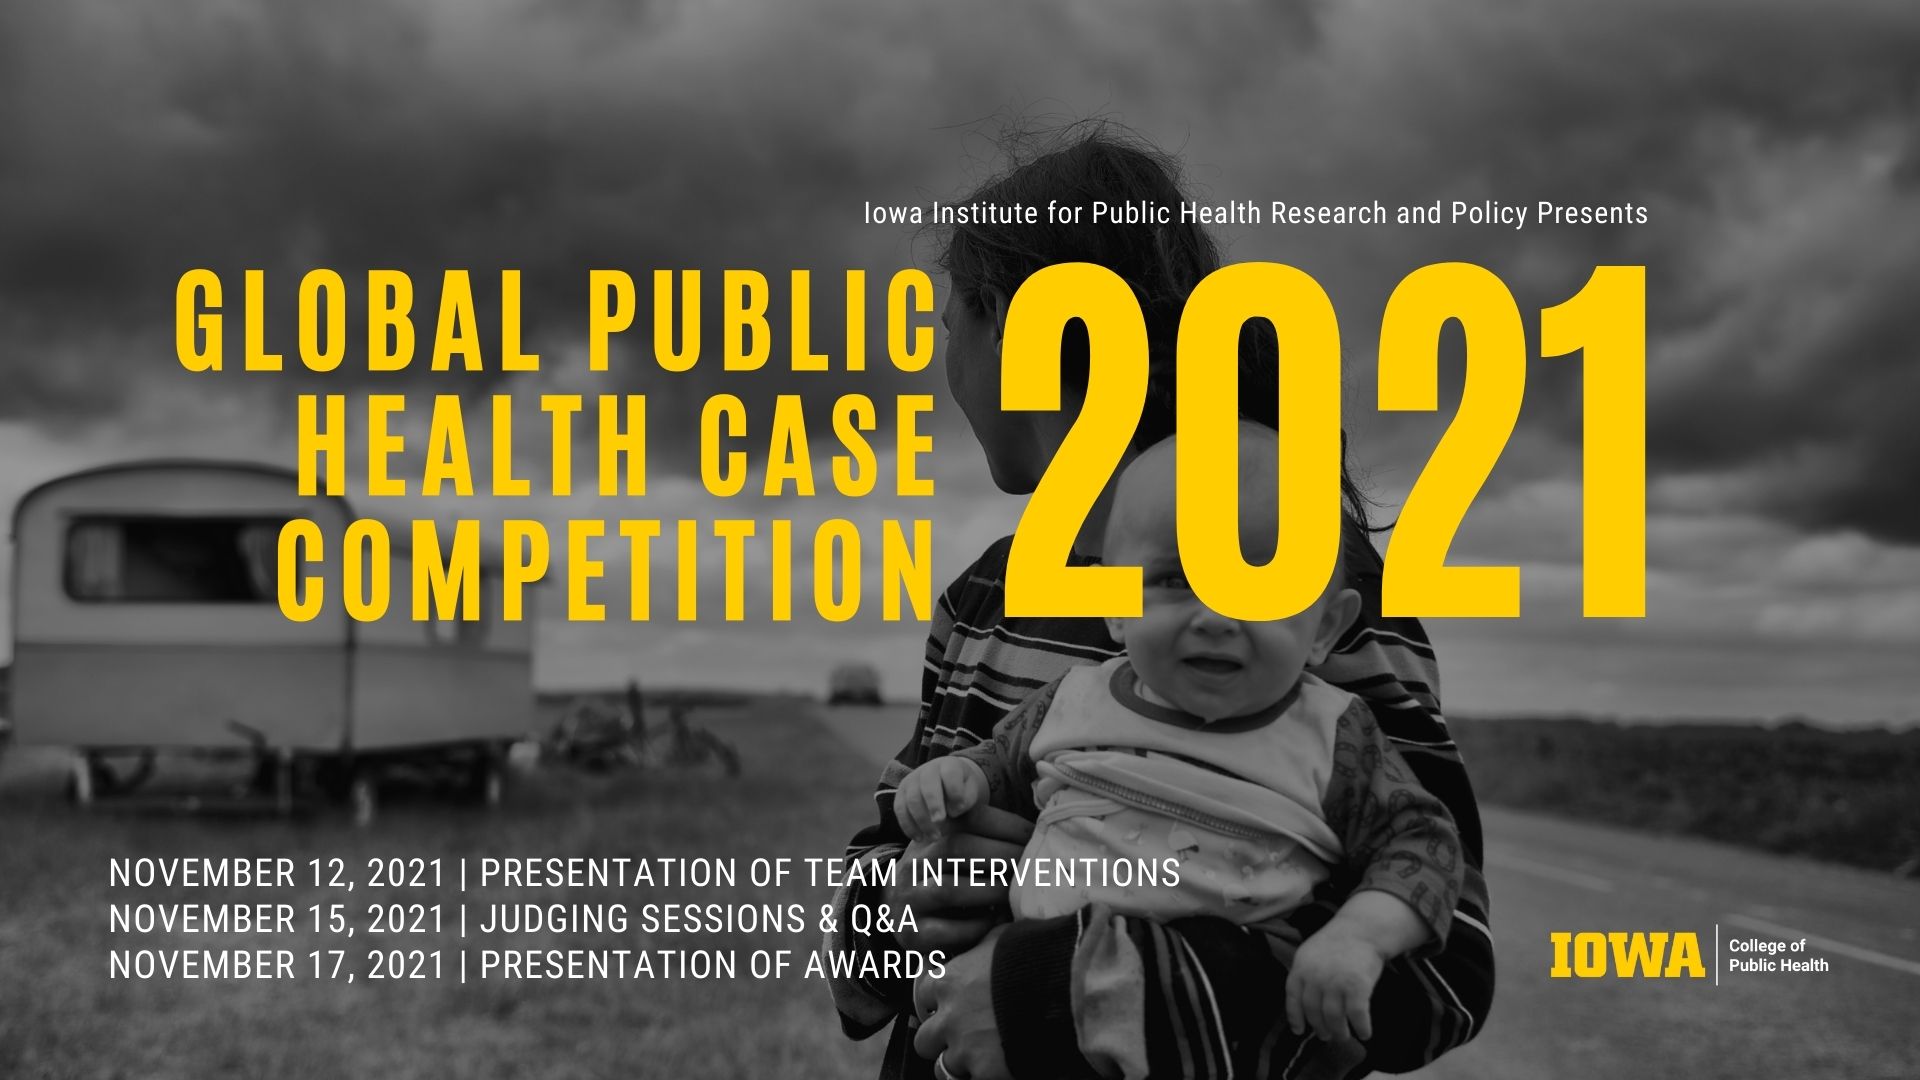 Global Health Case Competition: Live Judging Sessions promotional image